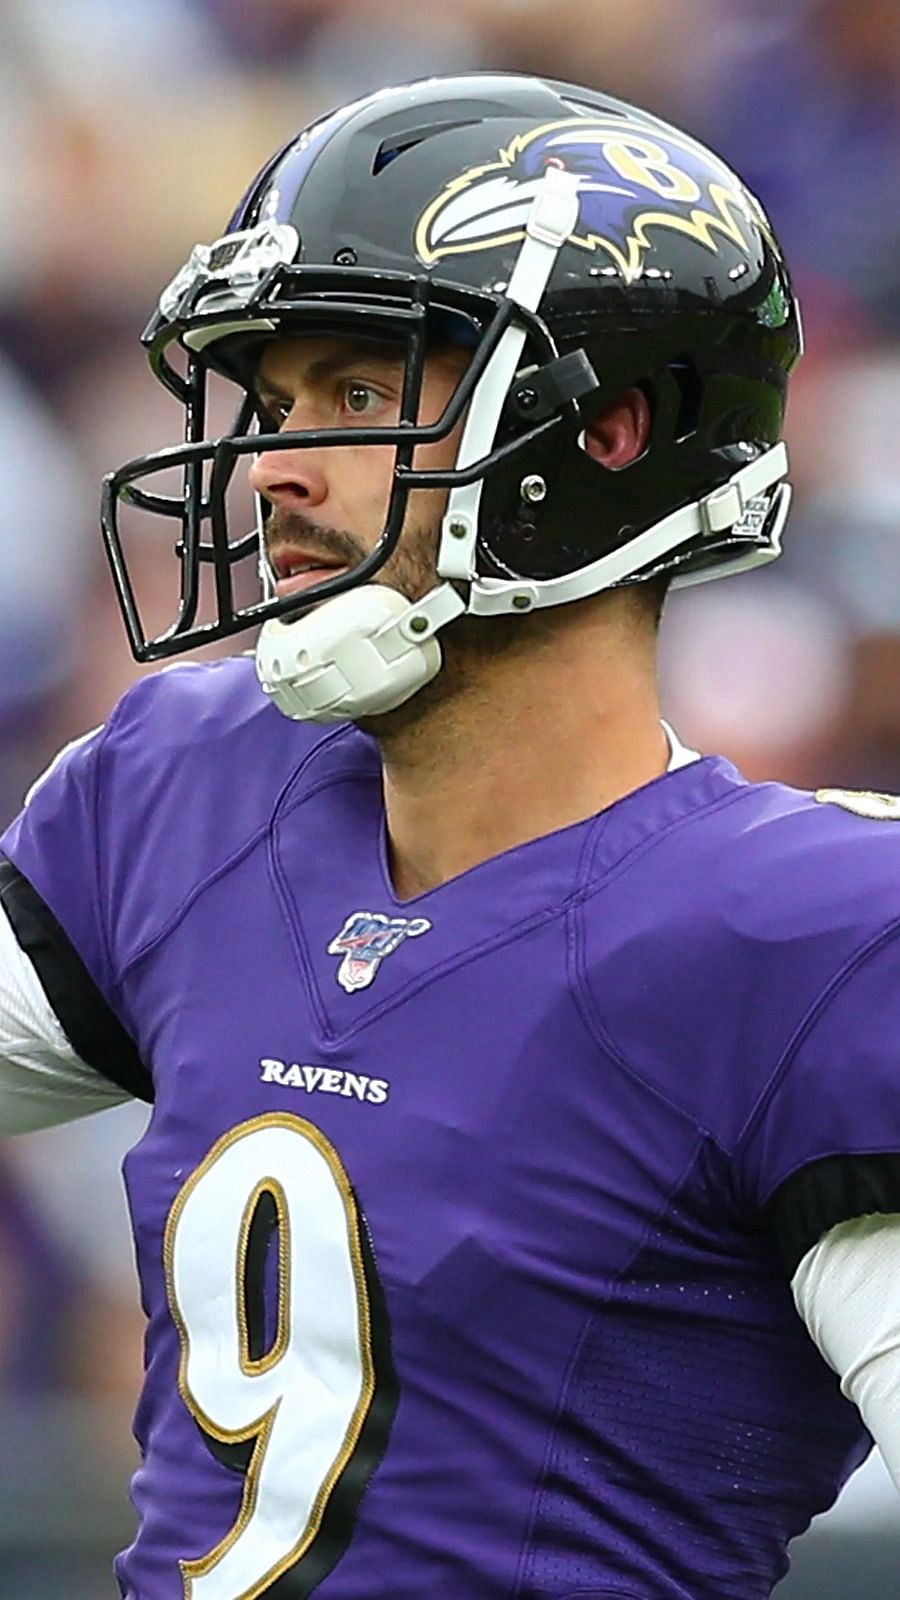 Top 5 NFL kickers going into 2021